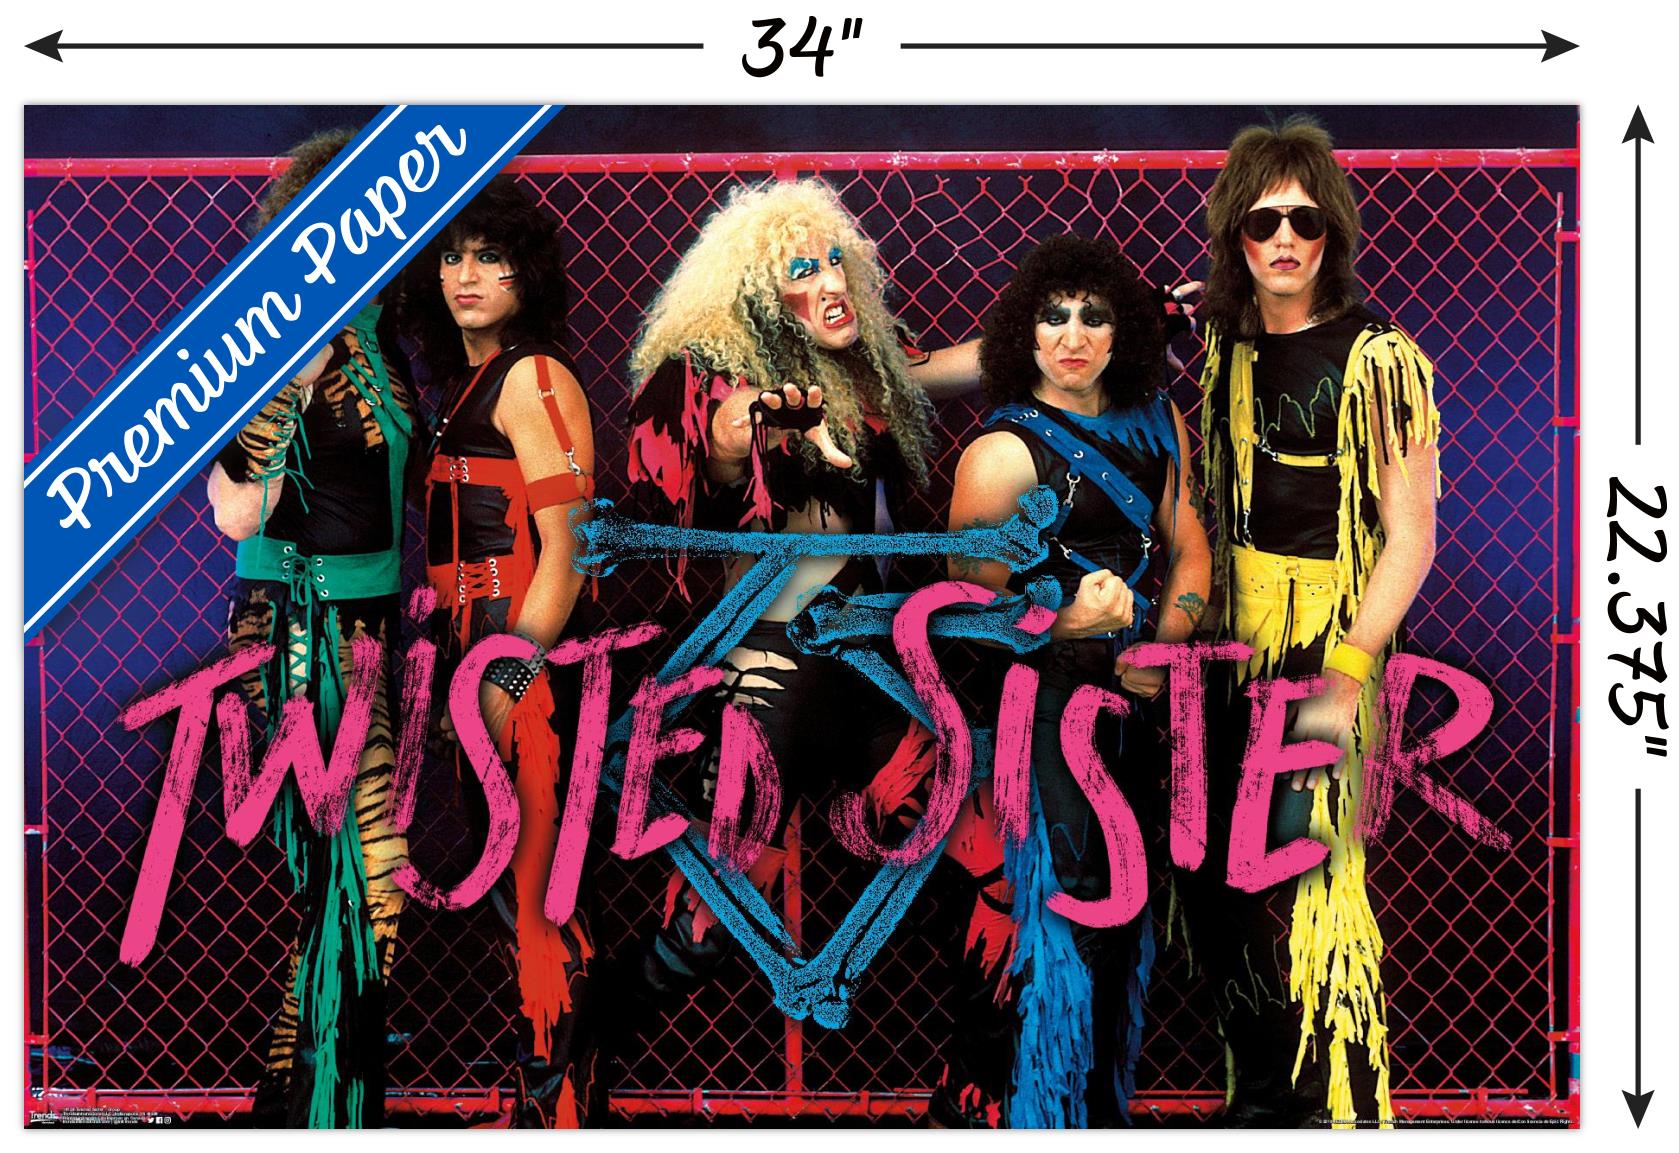 LOT OF 2 POSTERS:MUSIC TWISTED SISTER GROUP FREE SHIP  #15-351  LC16 H 